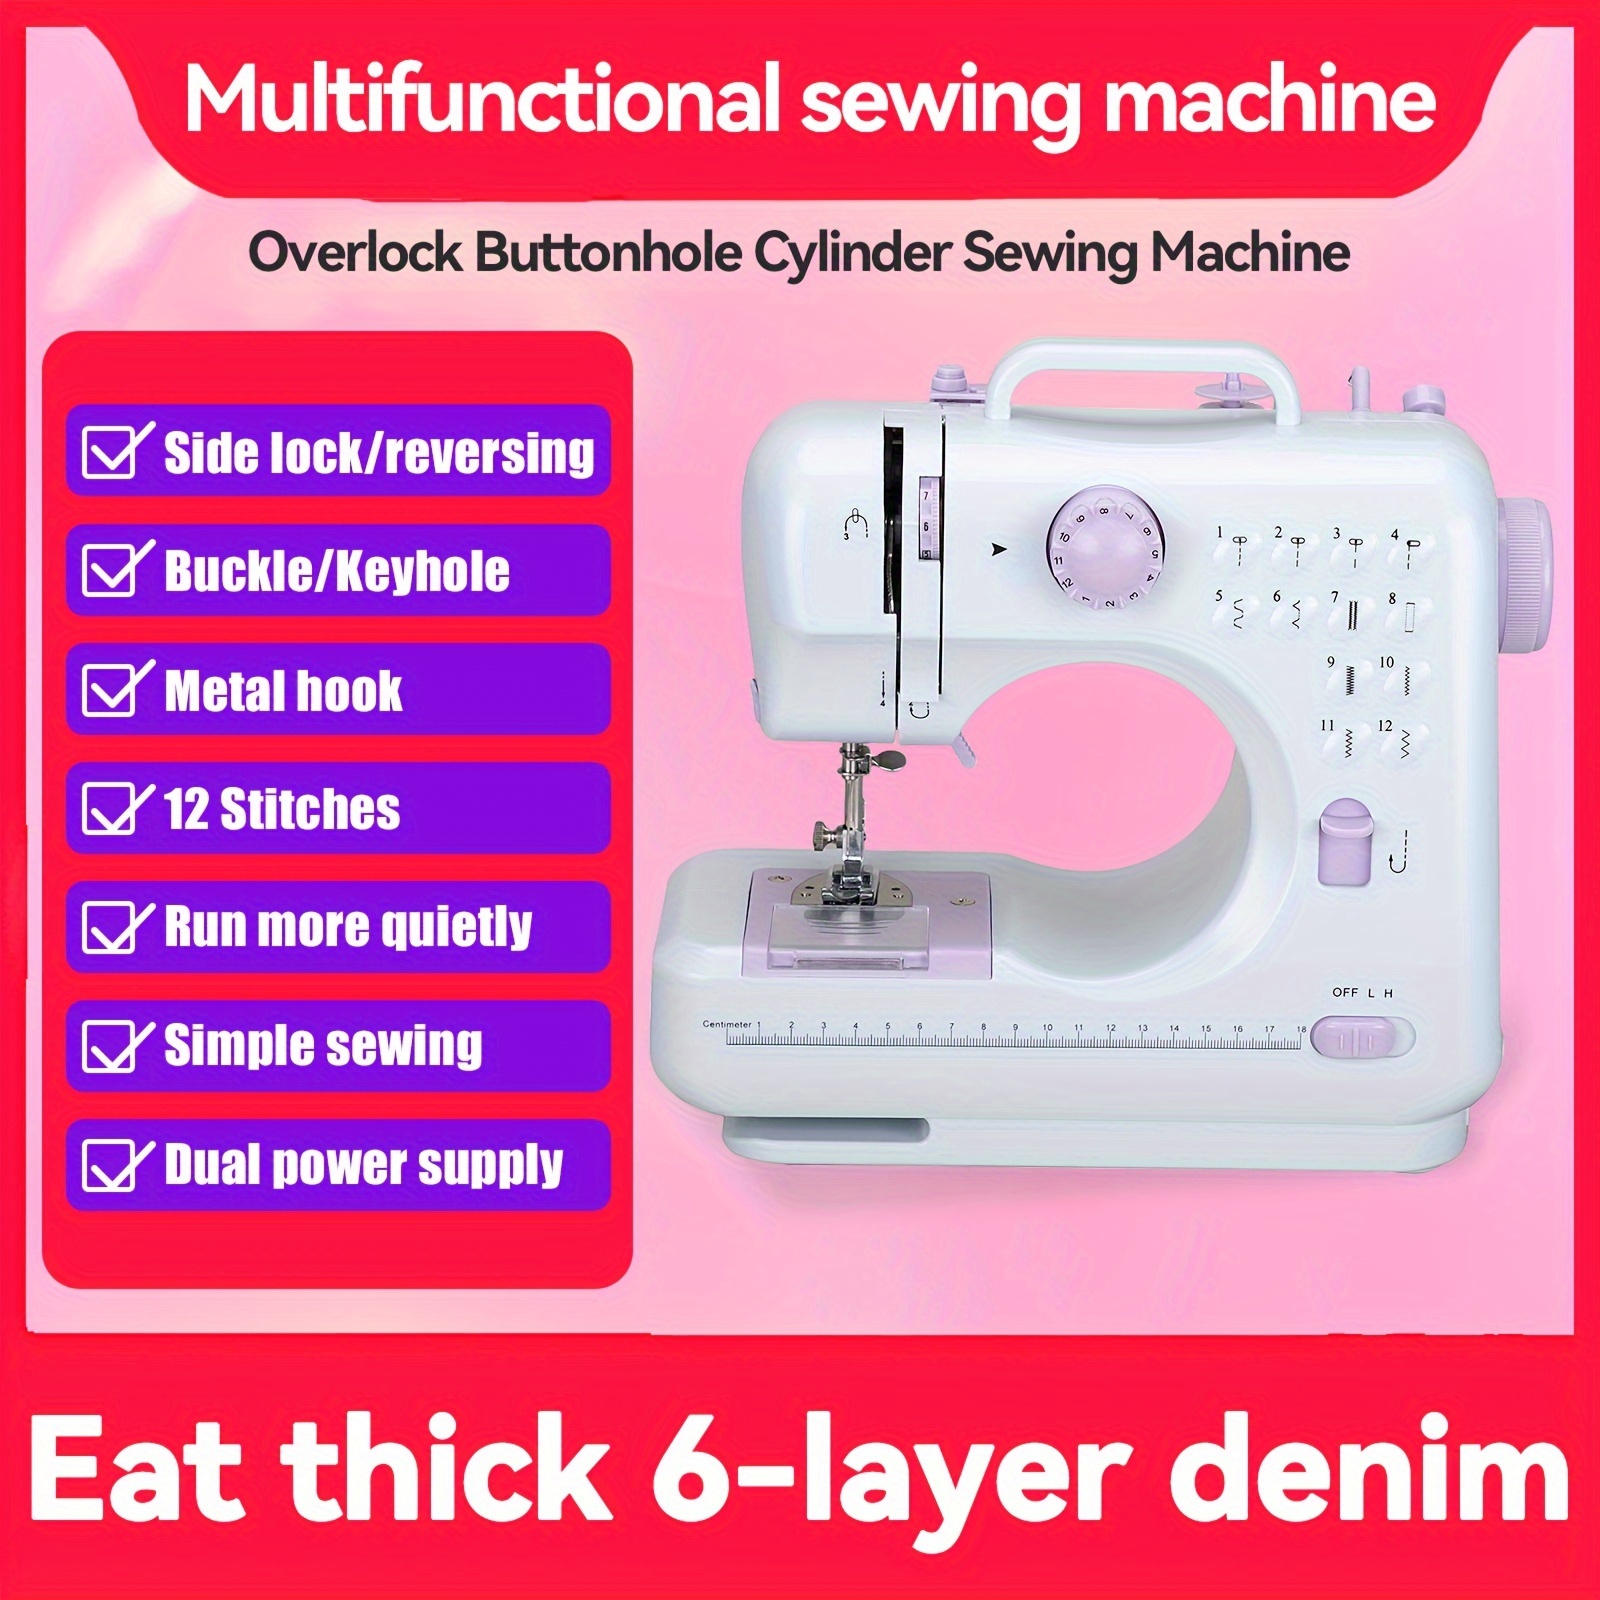 

Mini Sewing Machine For Beginner, Portable Sewing Machine, 12 Built-in Stitches Small Sewing Machine Double Threads And 2 Speed Multi-function Mending Machine With Foot Pedal For Kids, Women (purple)